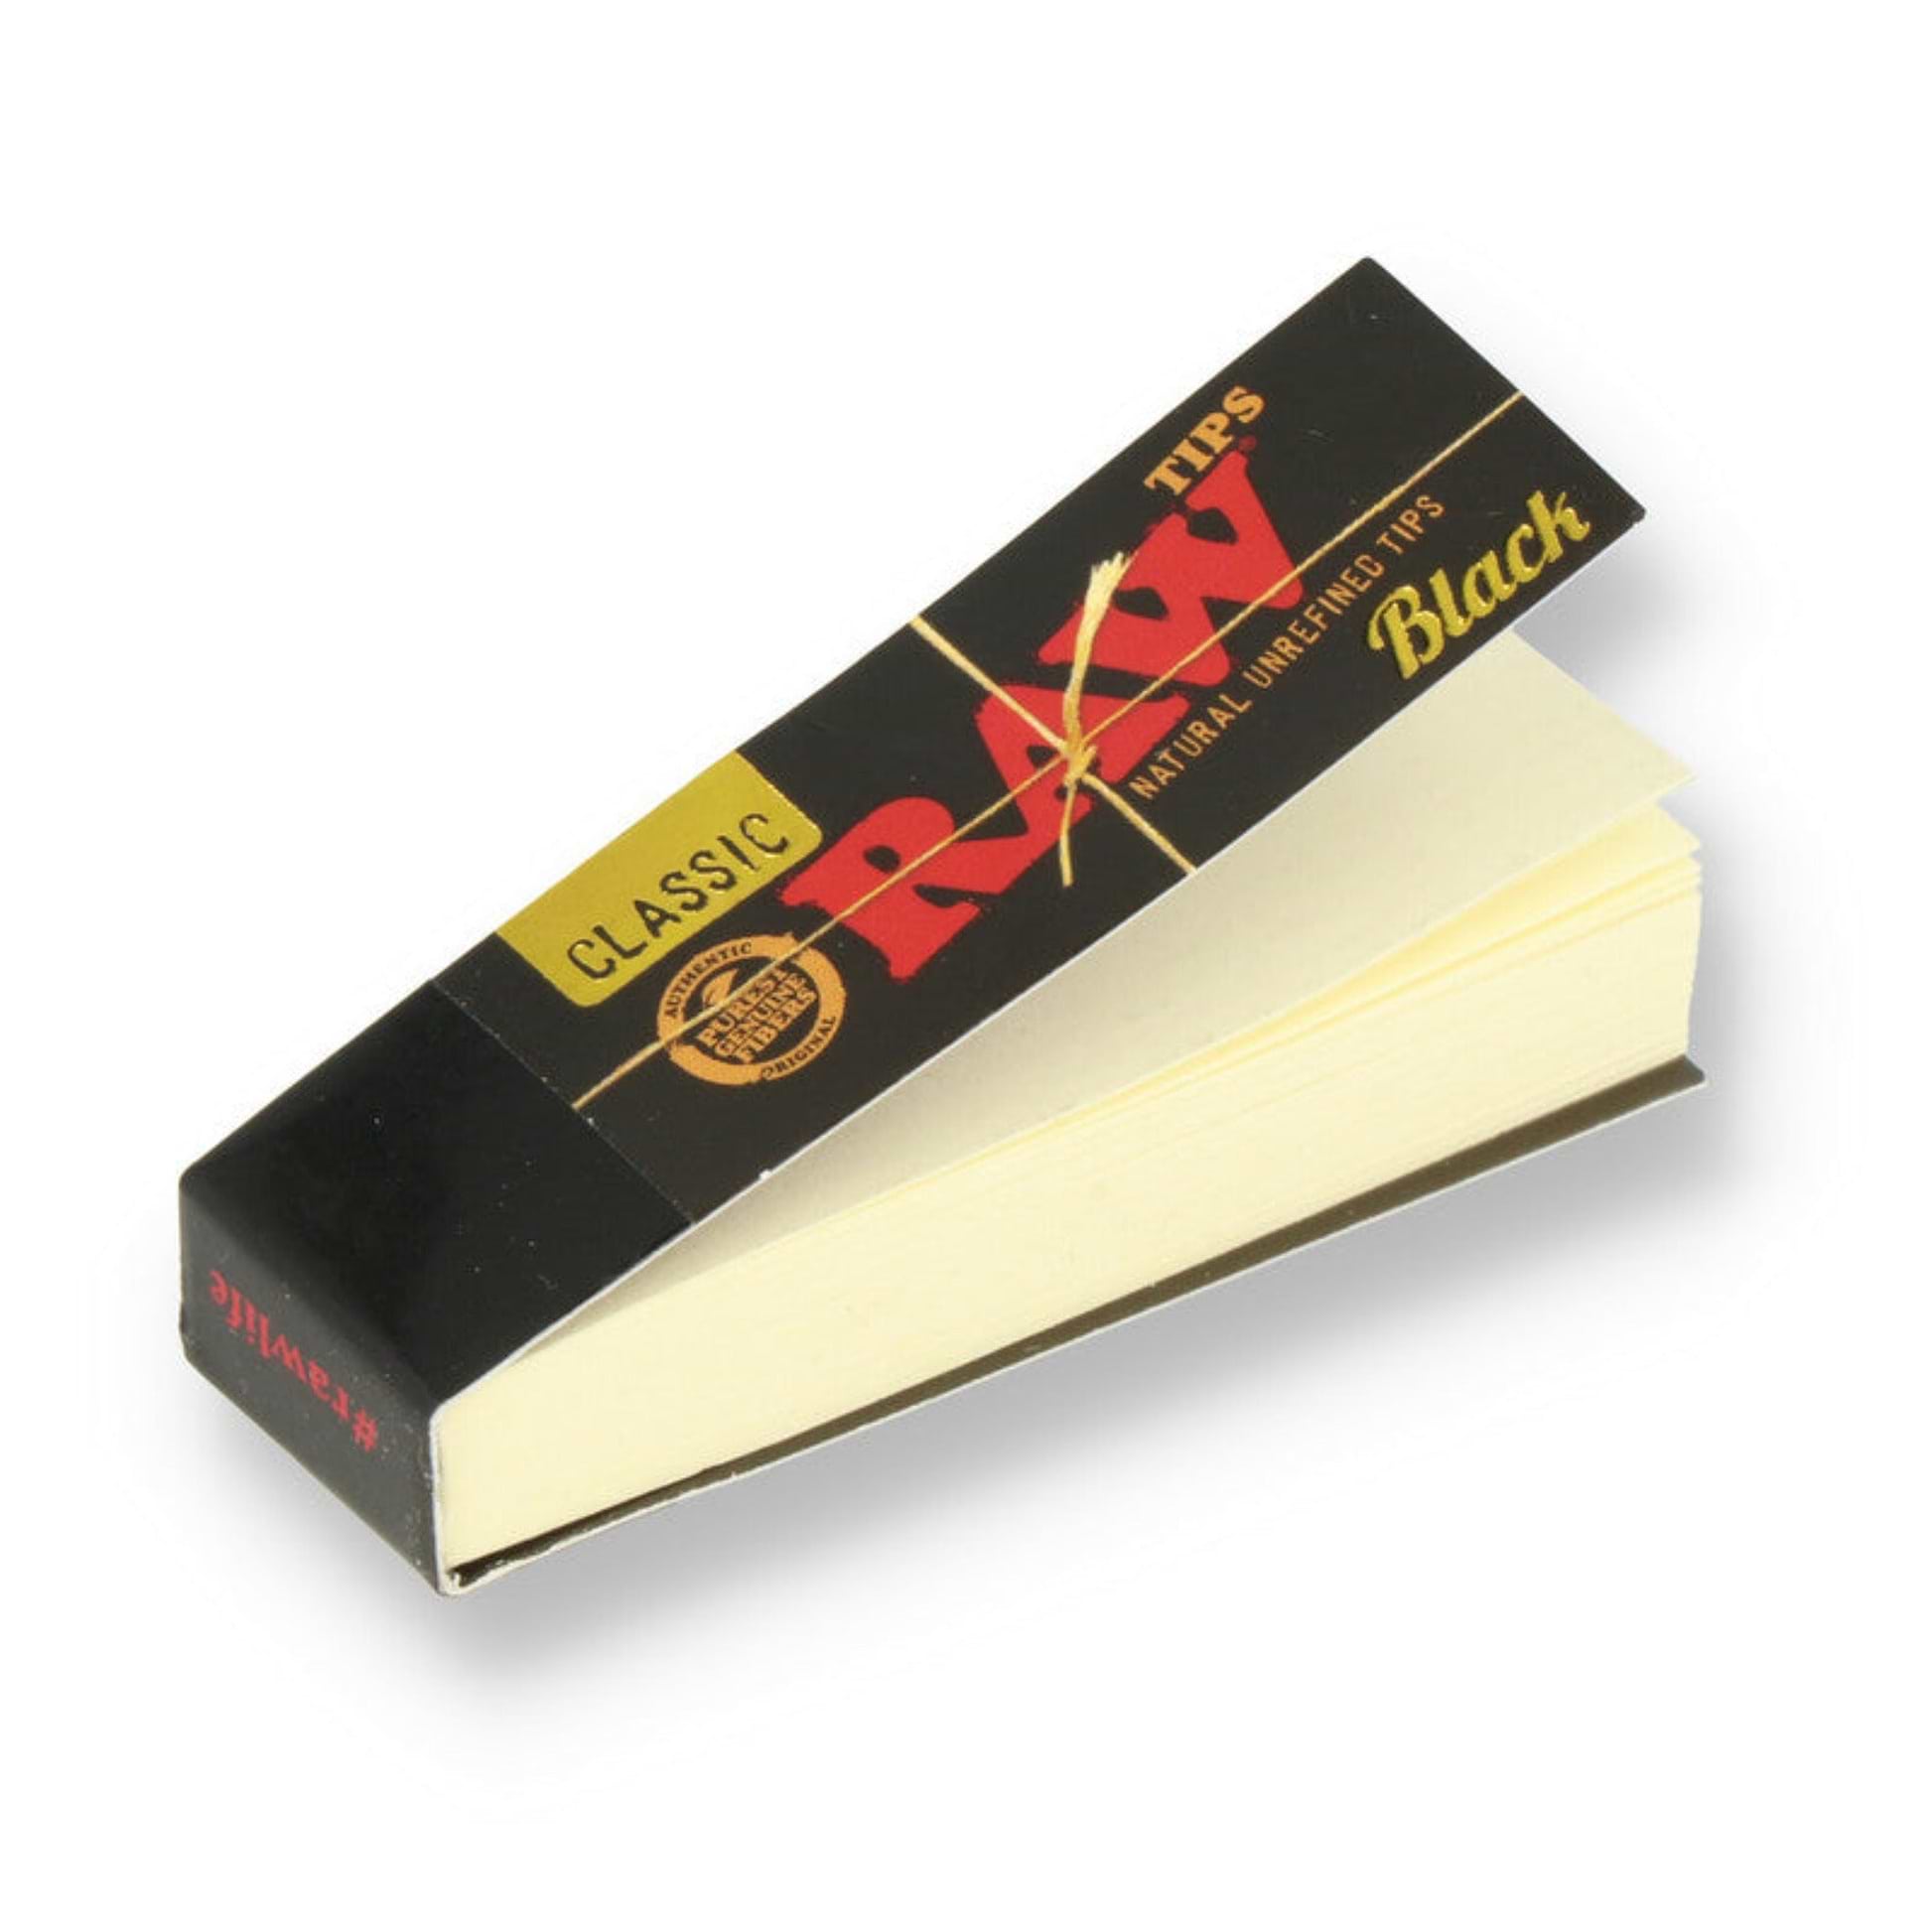 RAW Rolling Paper Tips - 3 Pack